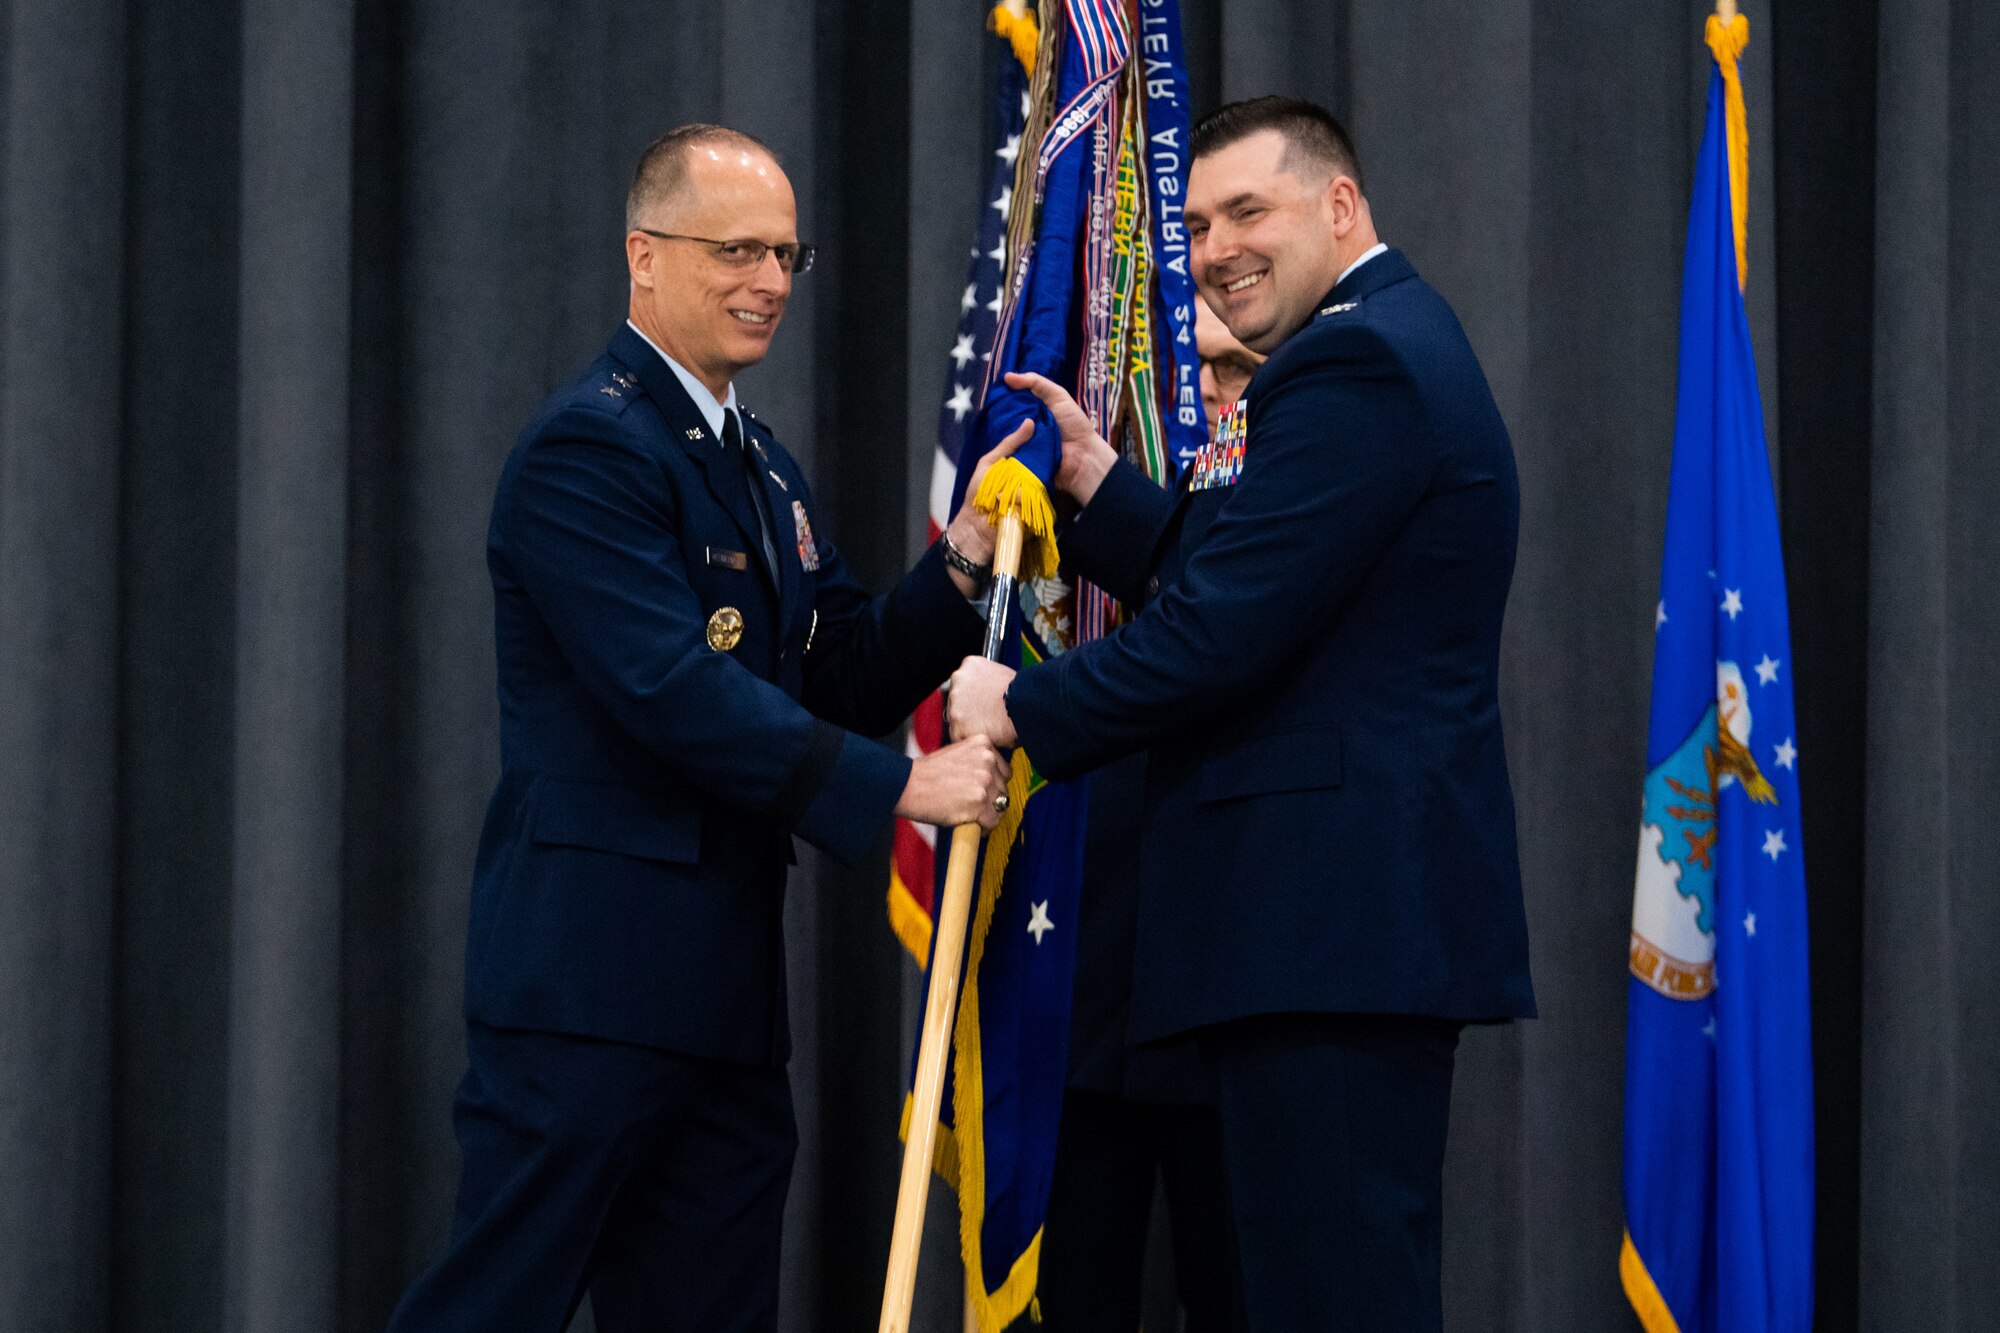 Col. Mark C. Dmytryszyn, right, incoming 2nd Bomb Wing commander, receives the guidon from Maj. Gen. Mark E. Weatherington, 8th Air Force and Joint-Global Strike Operations Center commander, during a change of command ceremony at Barksdale Air Force Base, La., July 23, 2020. The passing of a squadron’s guidon symbolizes a transfer of command. (U.S. Air Force photo by Airman 1st Class Jacob B. Wrightsman)